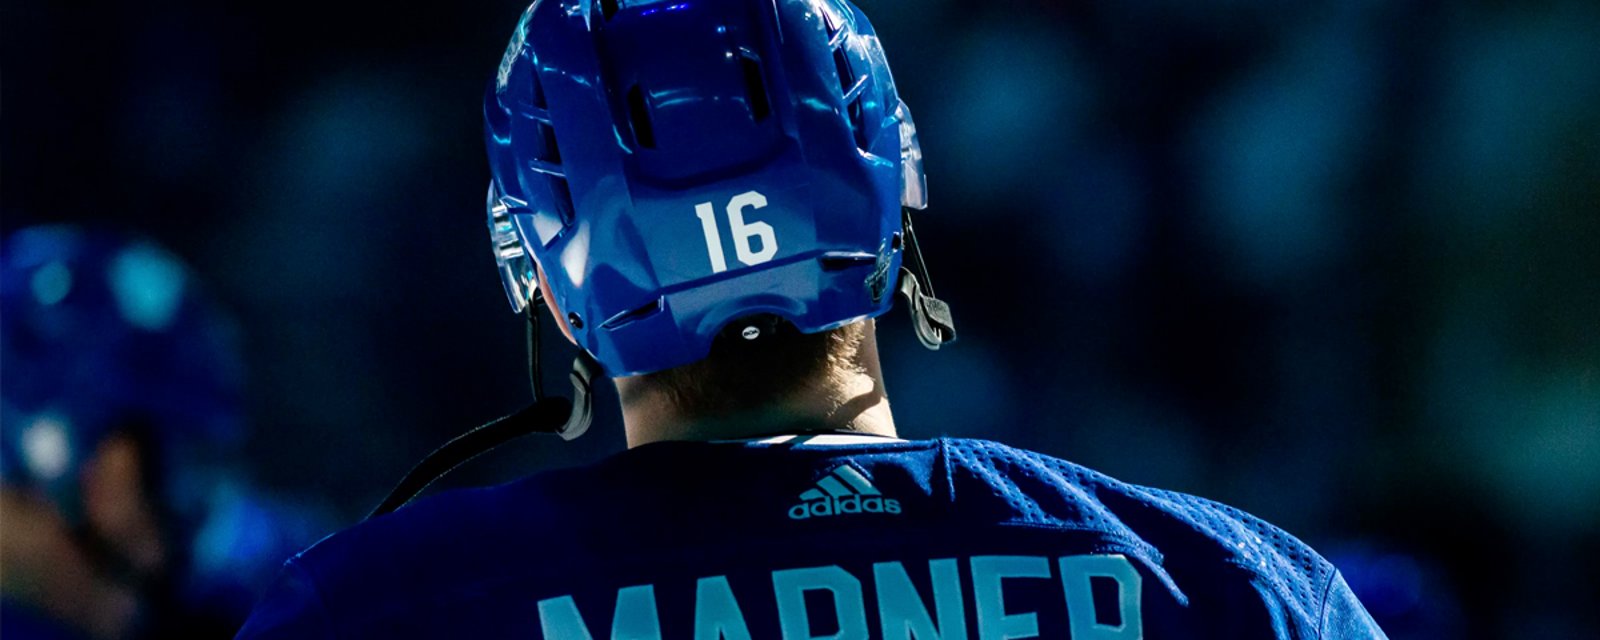 Report: One NHL team “seriously considering” signing Marner to offersheet